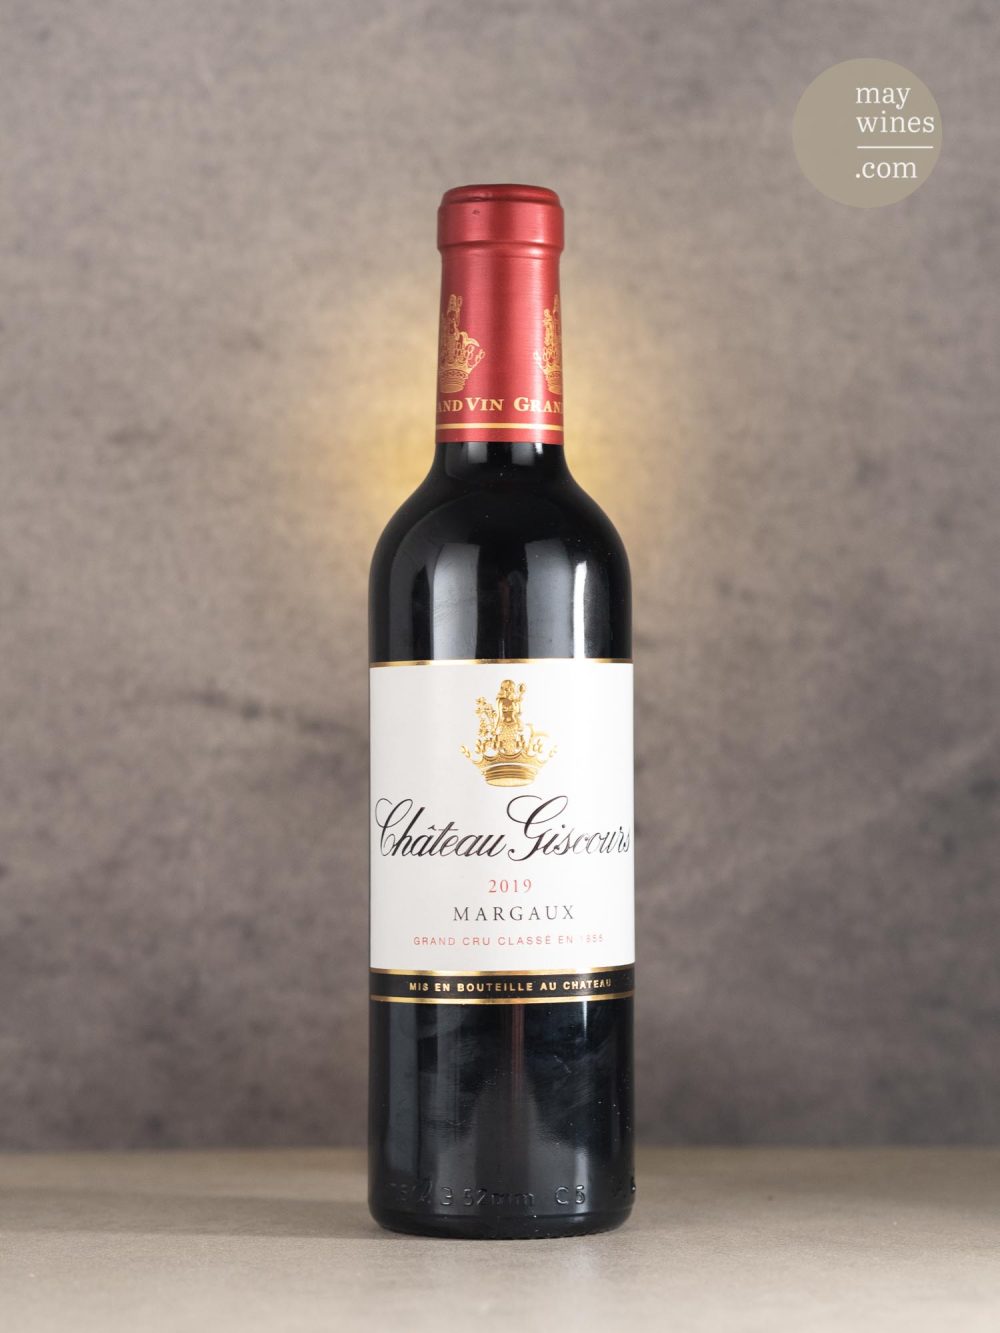 May Wines – Rotwein – 2019 Château Giscours